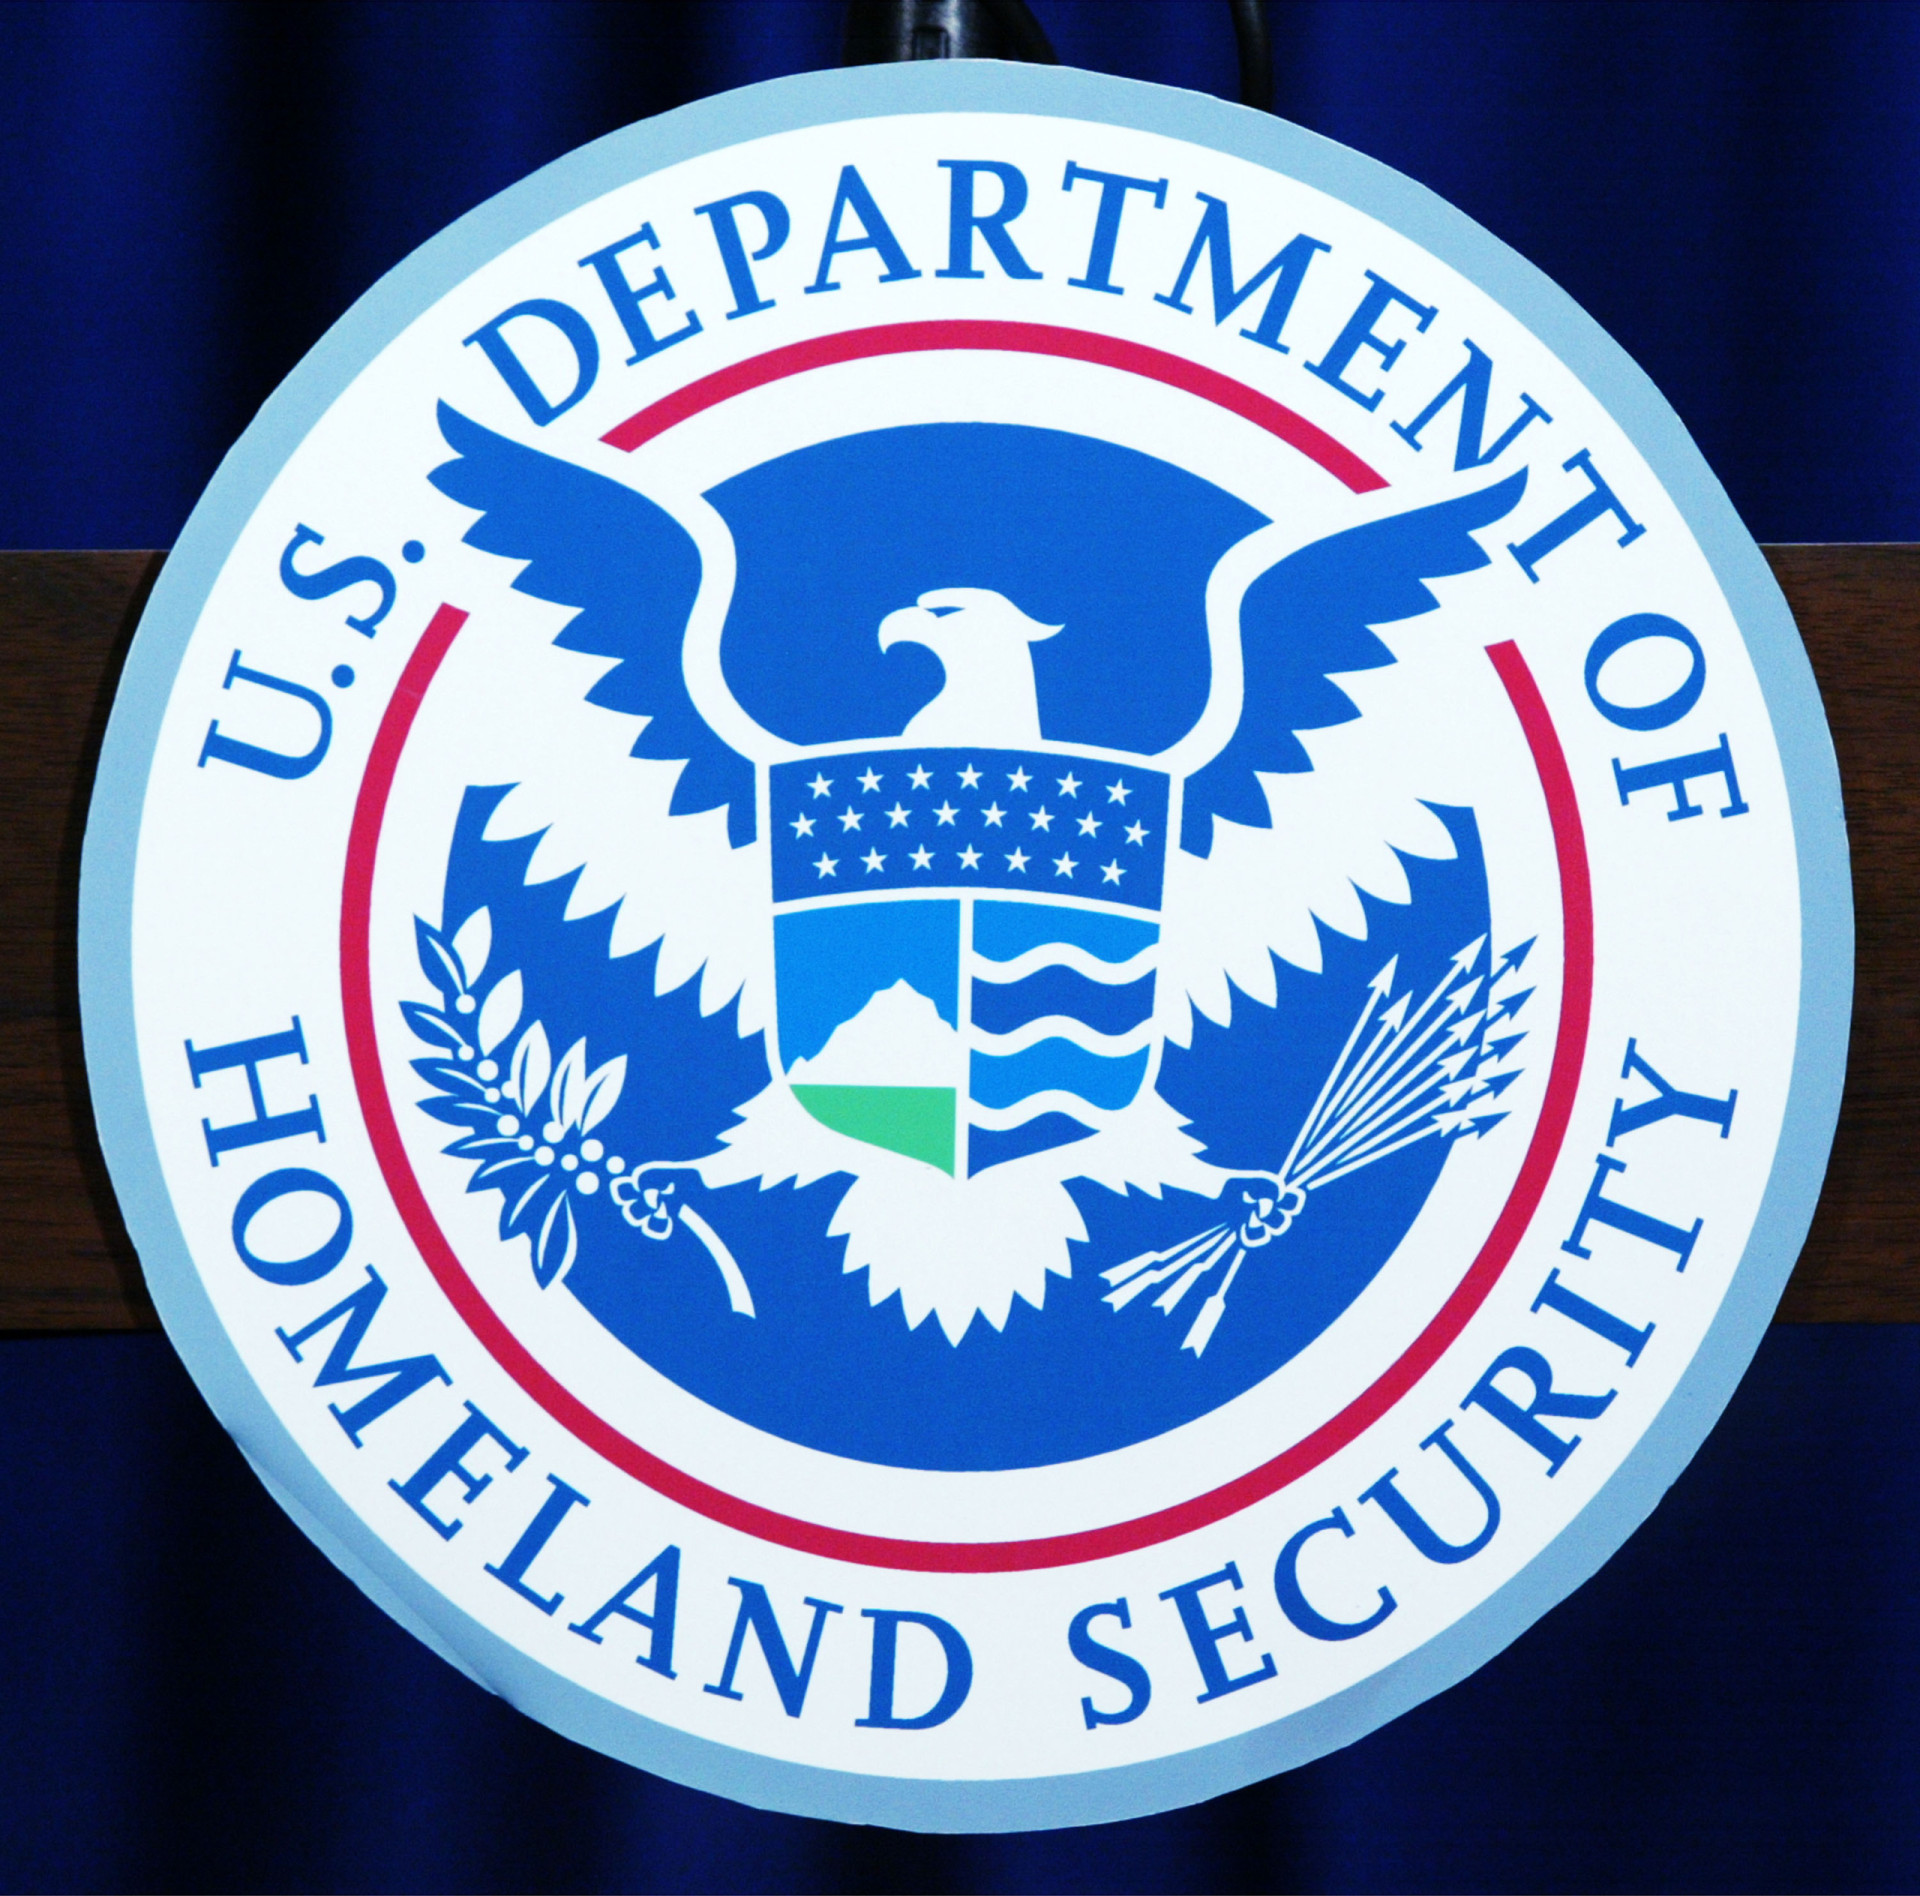 <p>An application for a green card is decided upon by the Department of Homeland Security. The processing time is anywhere from a few months to many years, depending on the type of green card you're applying for and where you're applying from.</p><p><a href="https://www.msn.com/en-us/community/channel/vid-7xx8mnucu55yw63we9va2gwr7uihbxwc68fxqp25x6tg4ftibpra?cvid=94631541bc0f4f89bfd59158d696ad7e">Follow us and access great exclusive content every day</a></p>